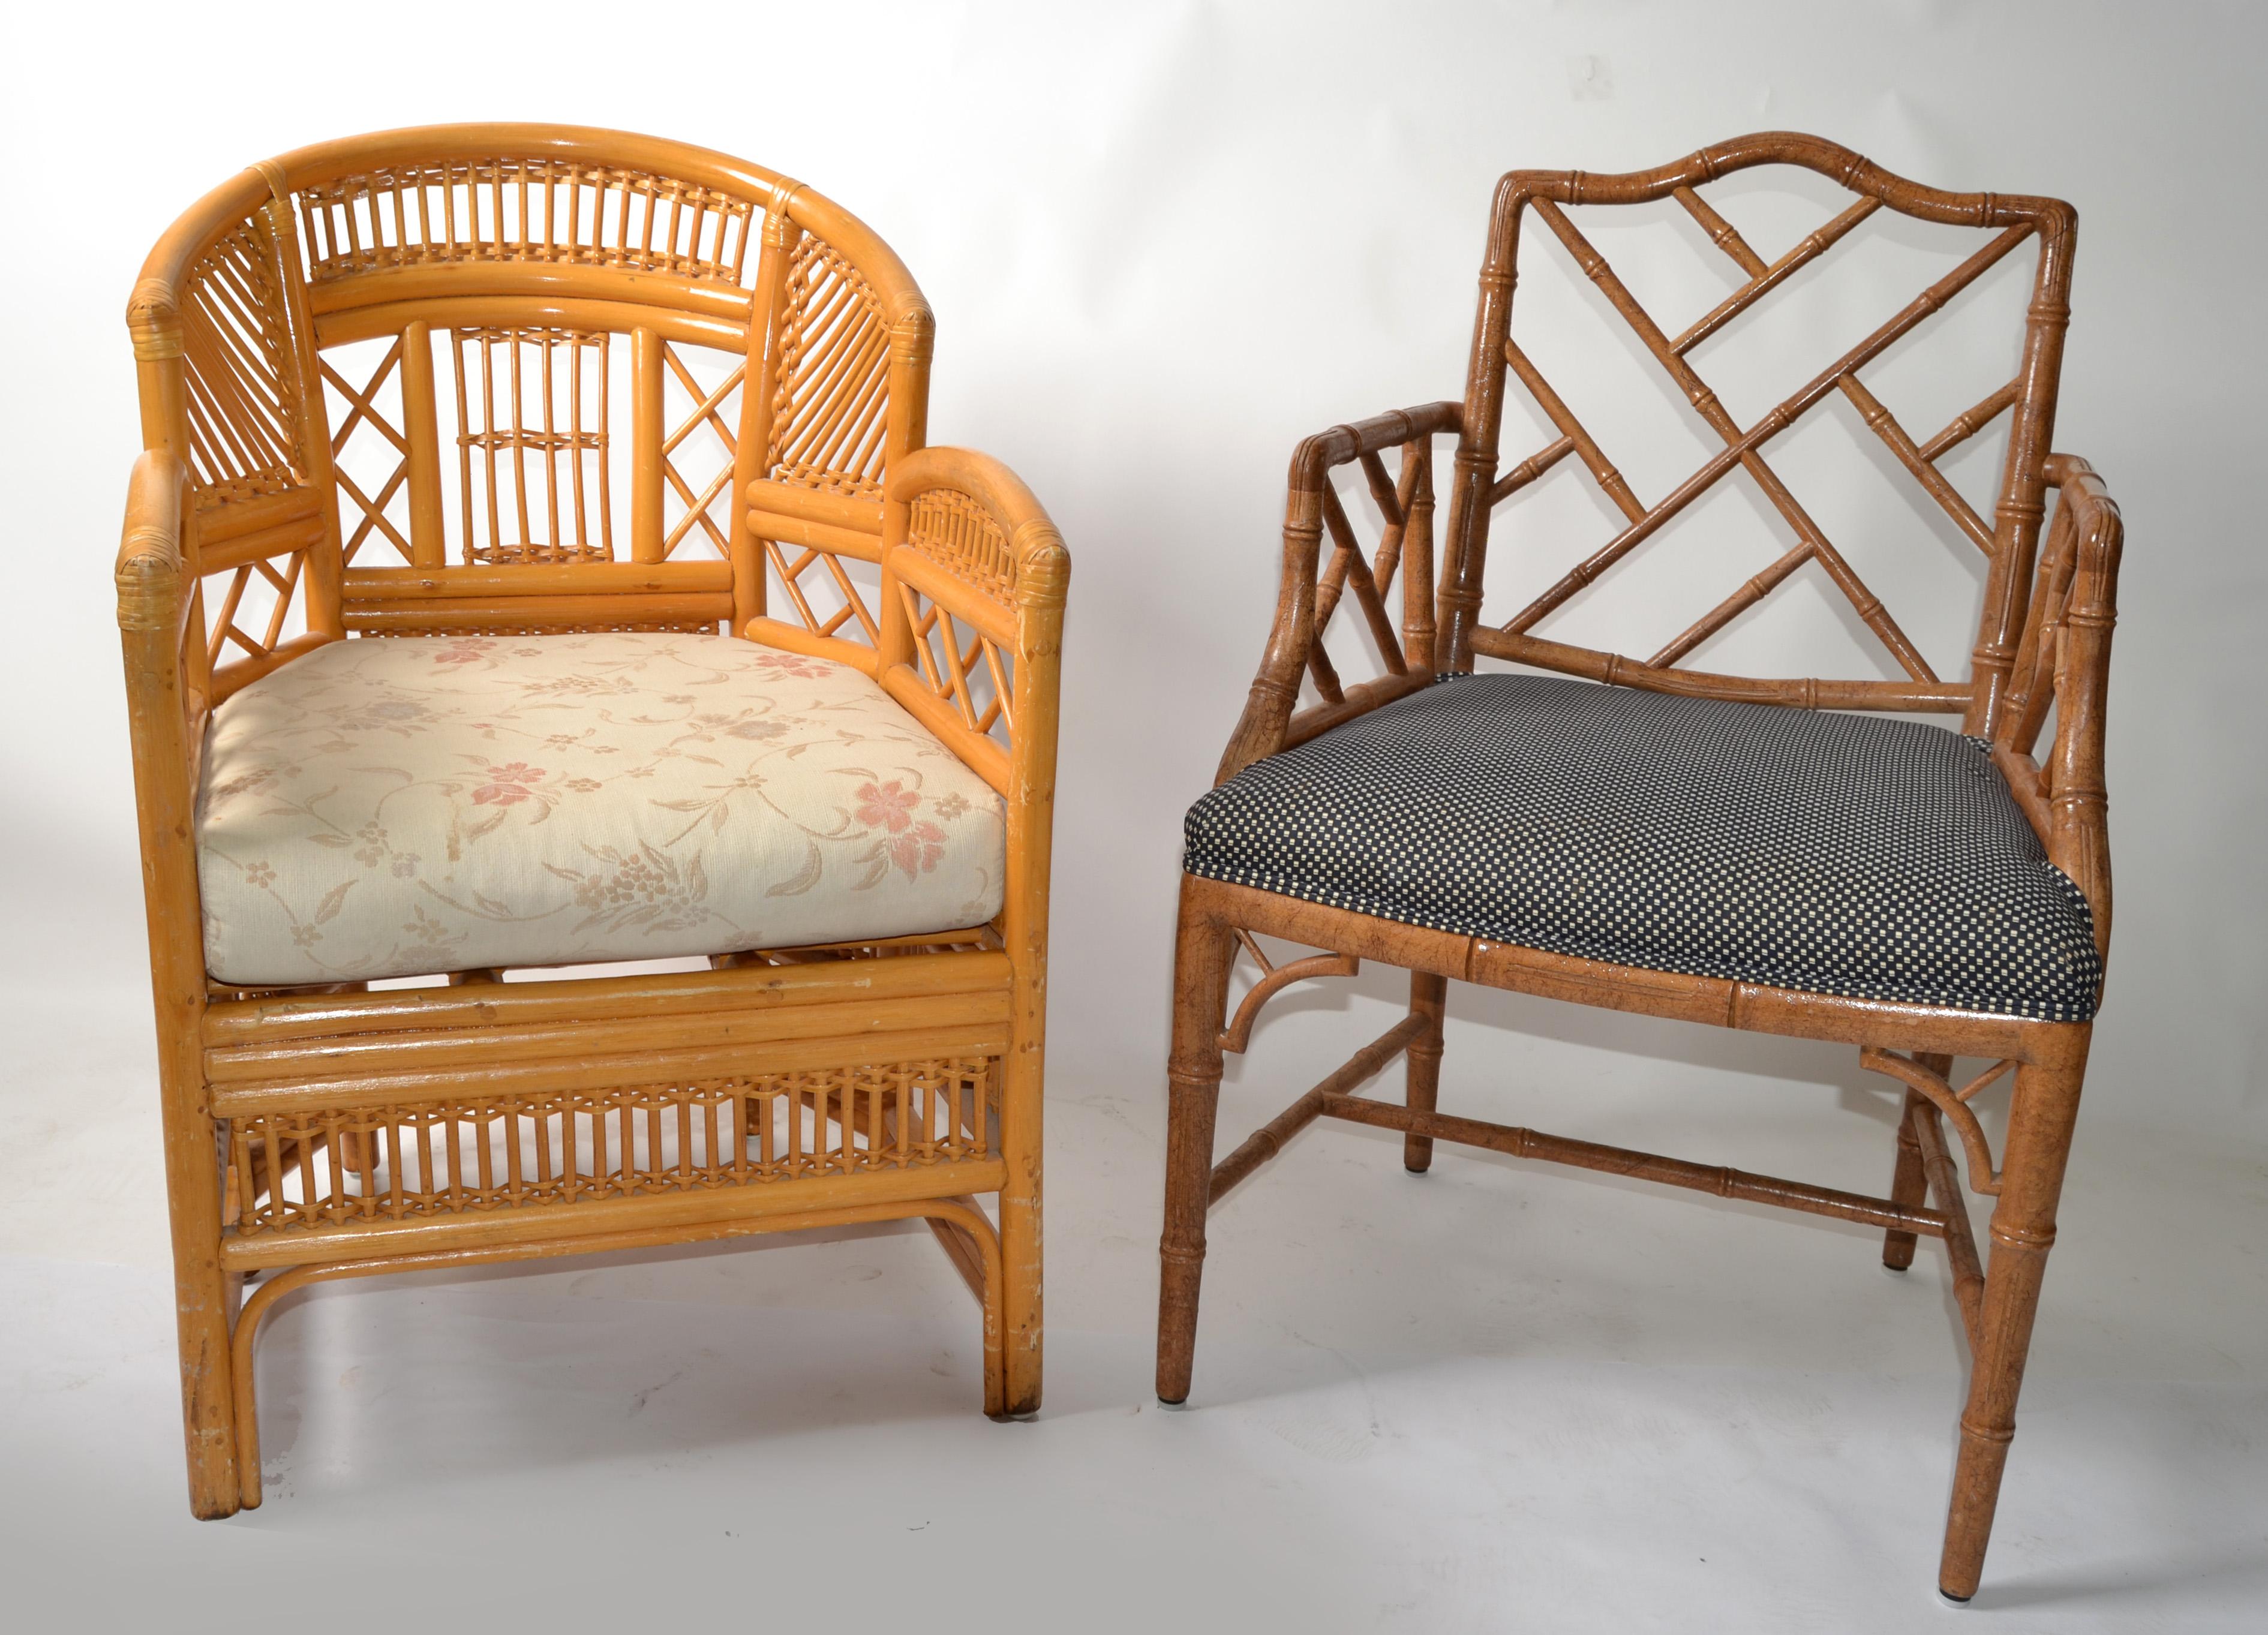 Vintage Brighton Chinoiserie Rattan Blonde Bamboo Caning Split Reed Armchair 70s In Good Condition For Sale In Miami, FL